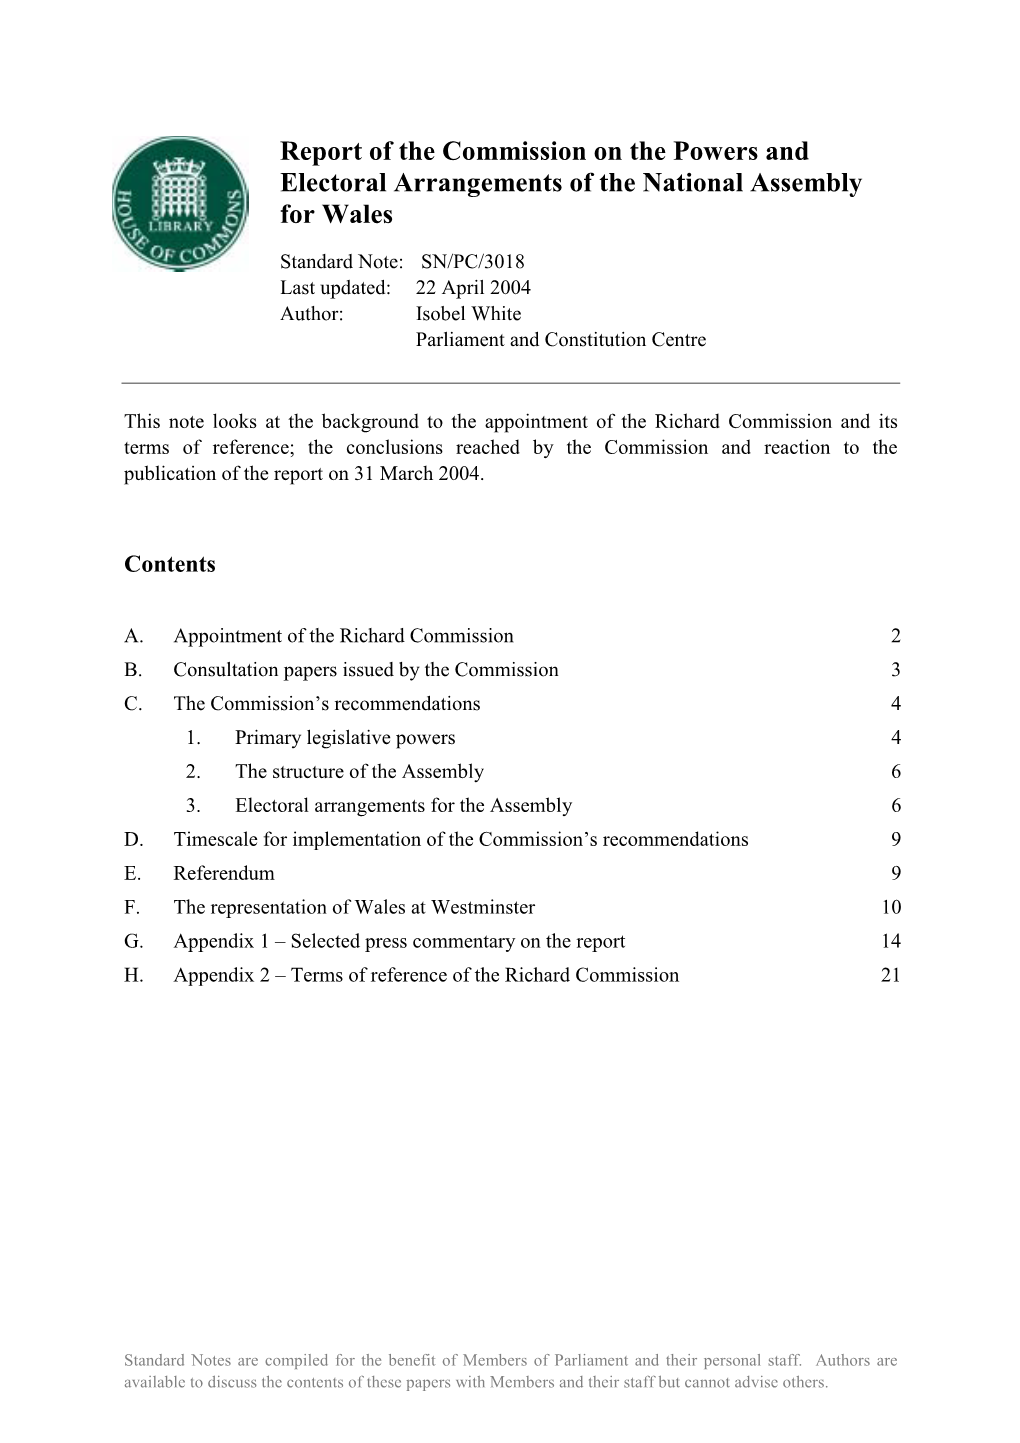 Report of the Commissions on the Powers Ans Electoral Arrangements